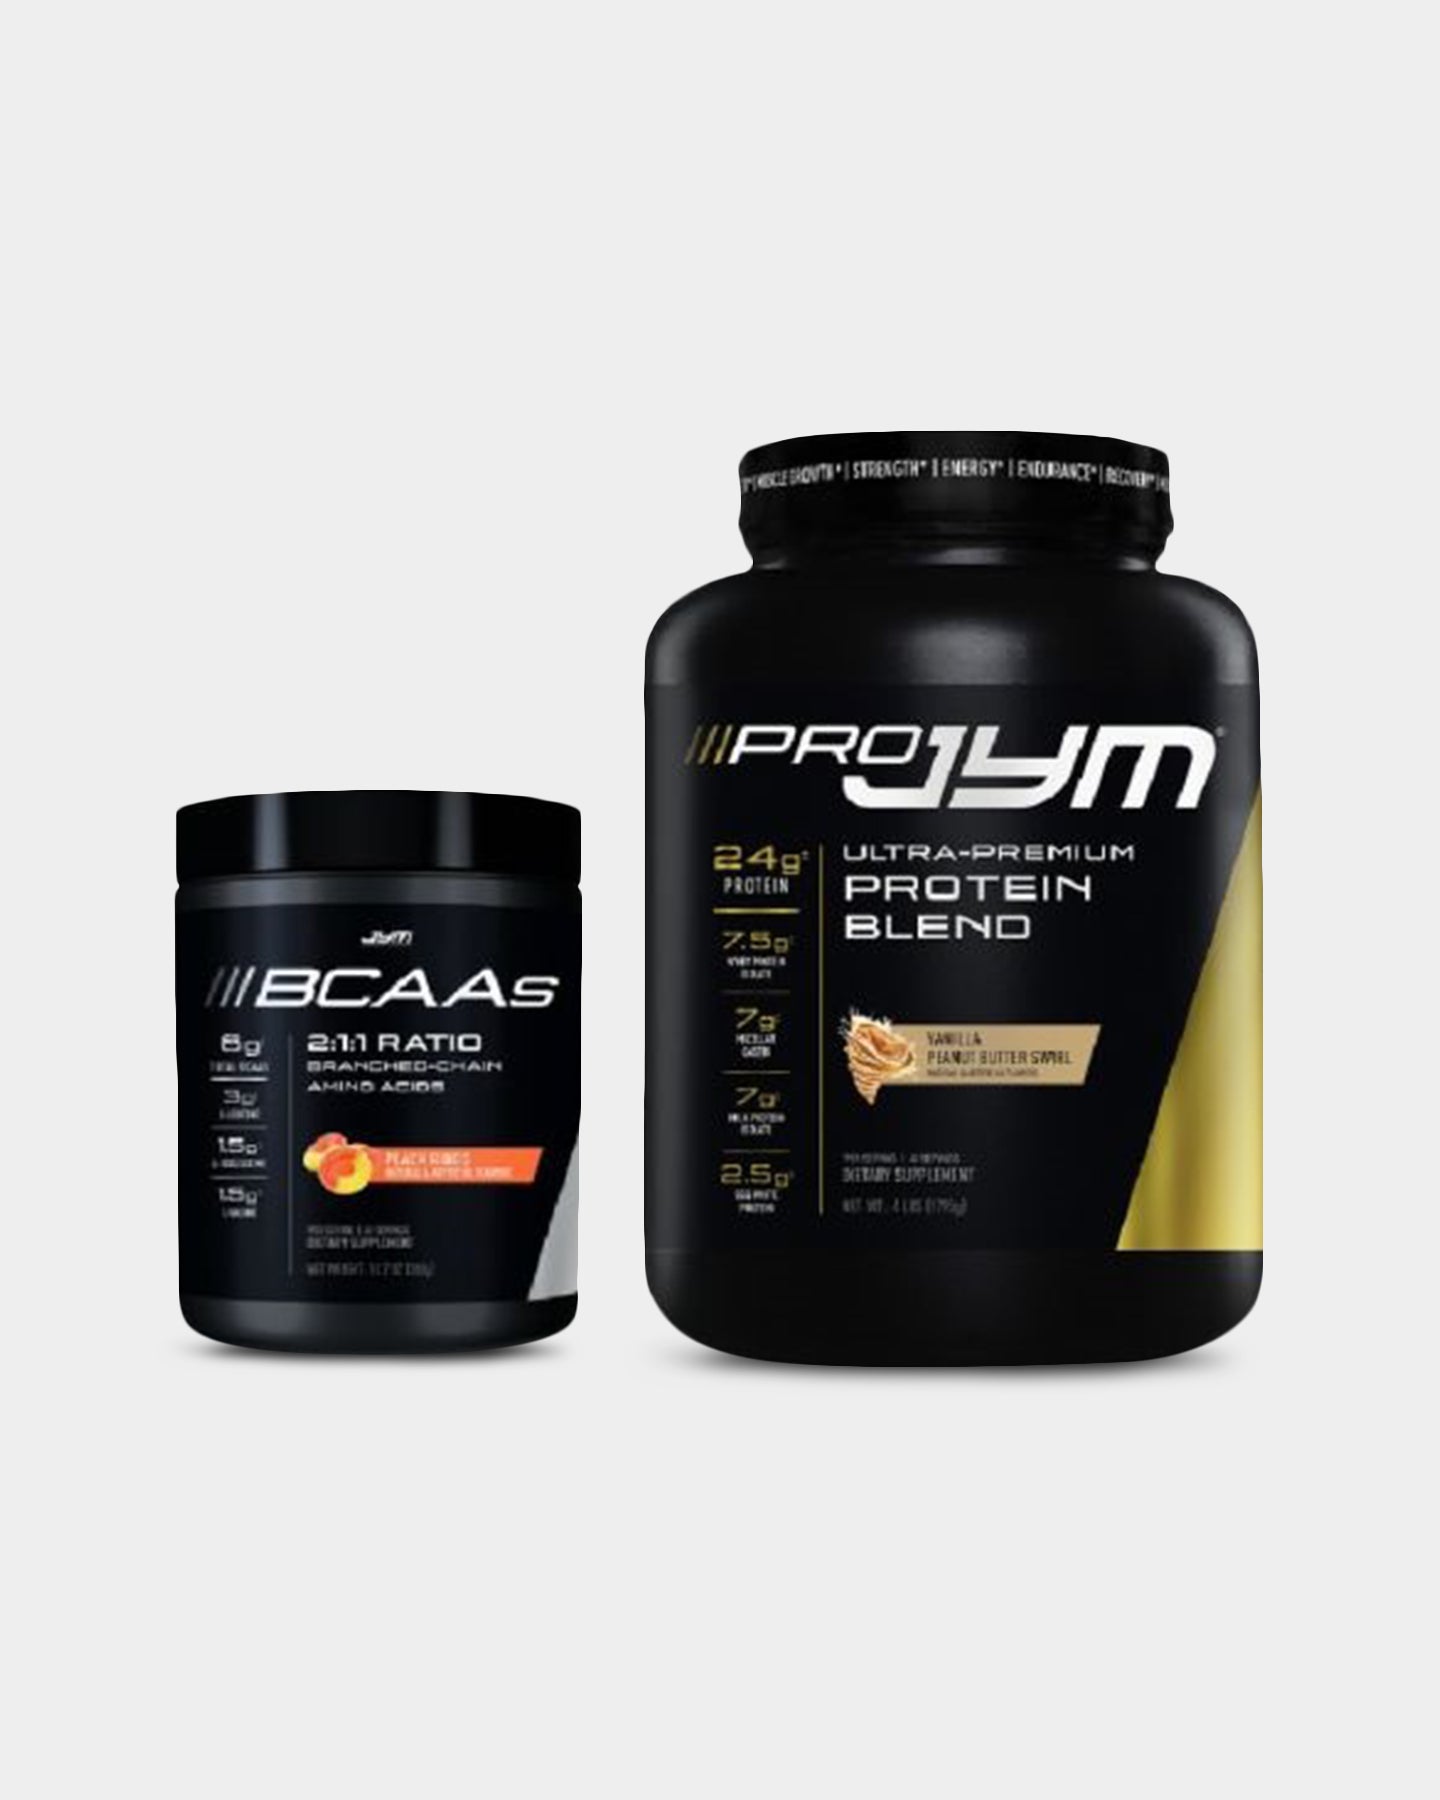 Image of JYM BCAAs and 4lb Pro JYM Stack